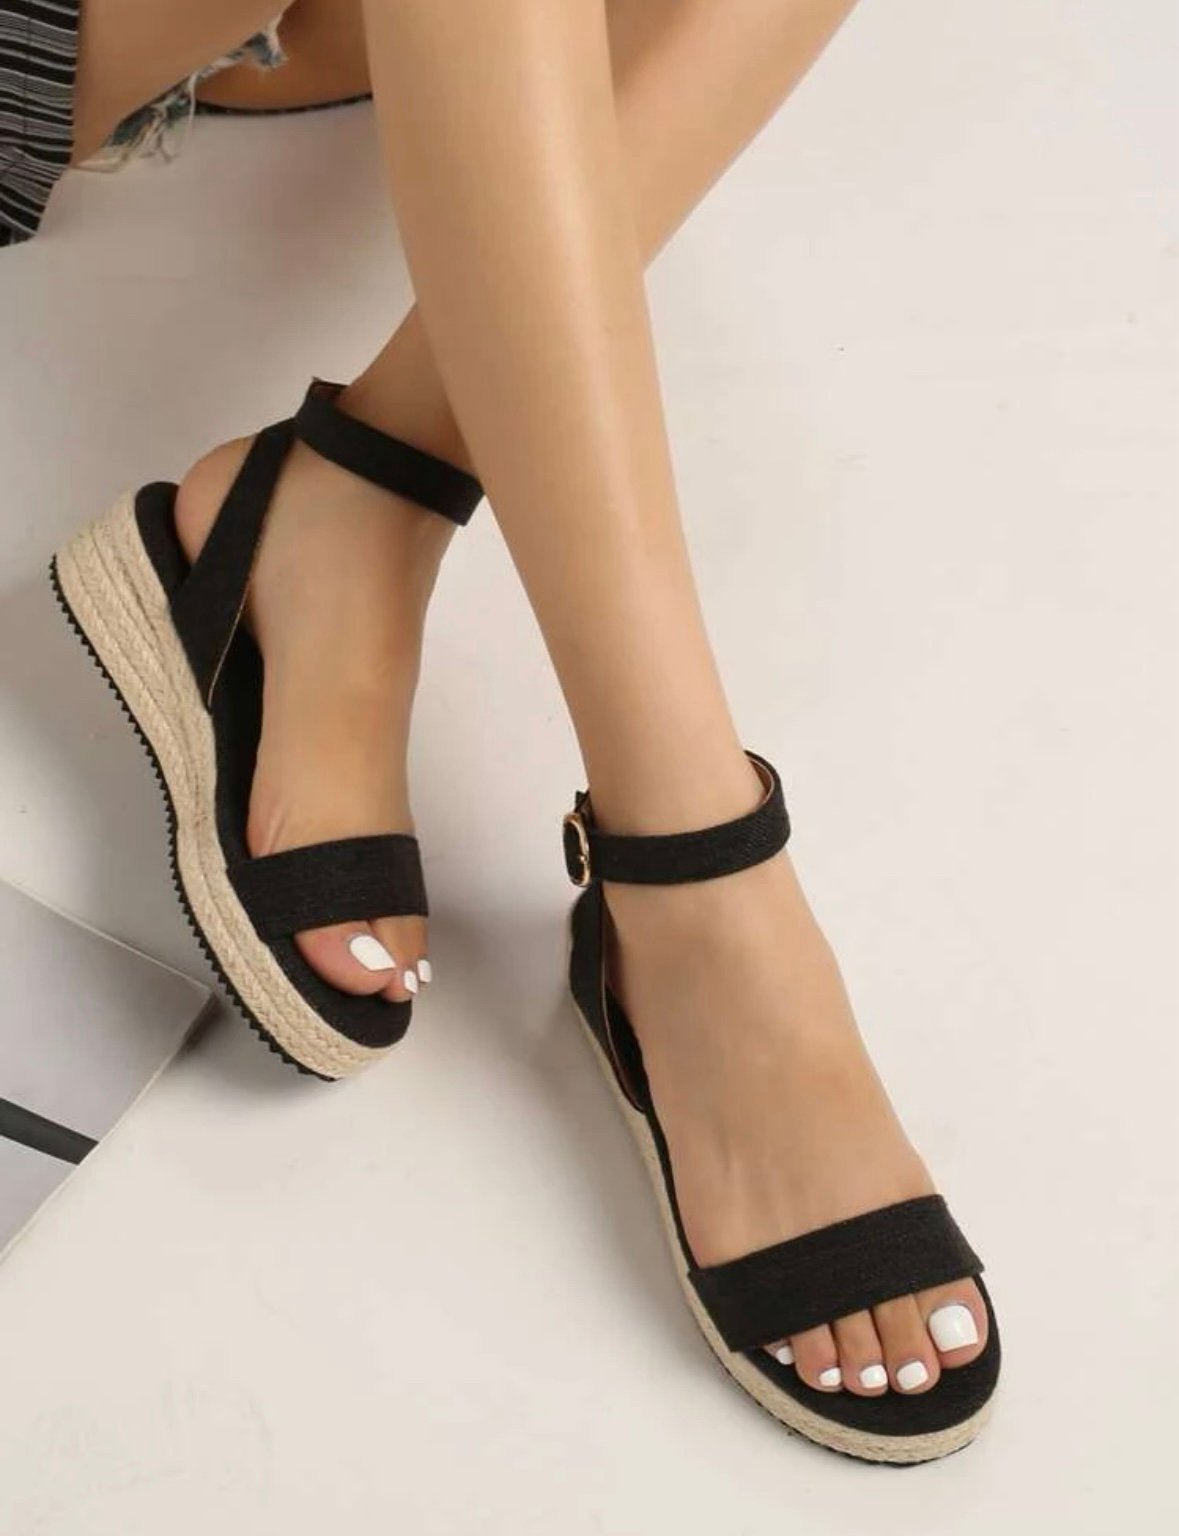 Women´s Platform Wedge Sandals, Fashionable And Versatile With Black Woven Ankle Q8ibEF6hP